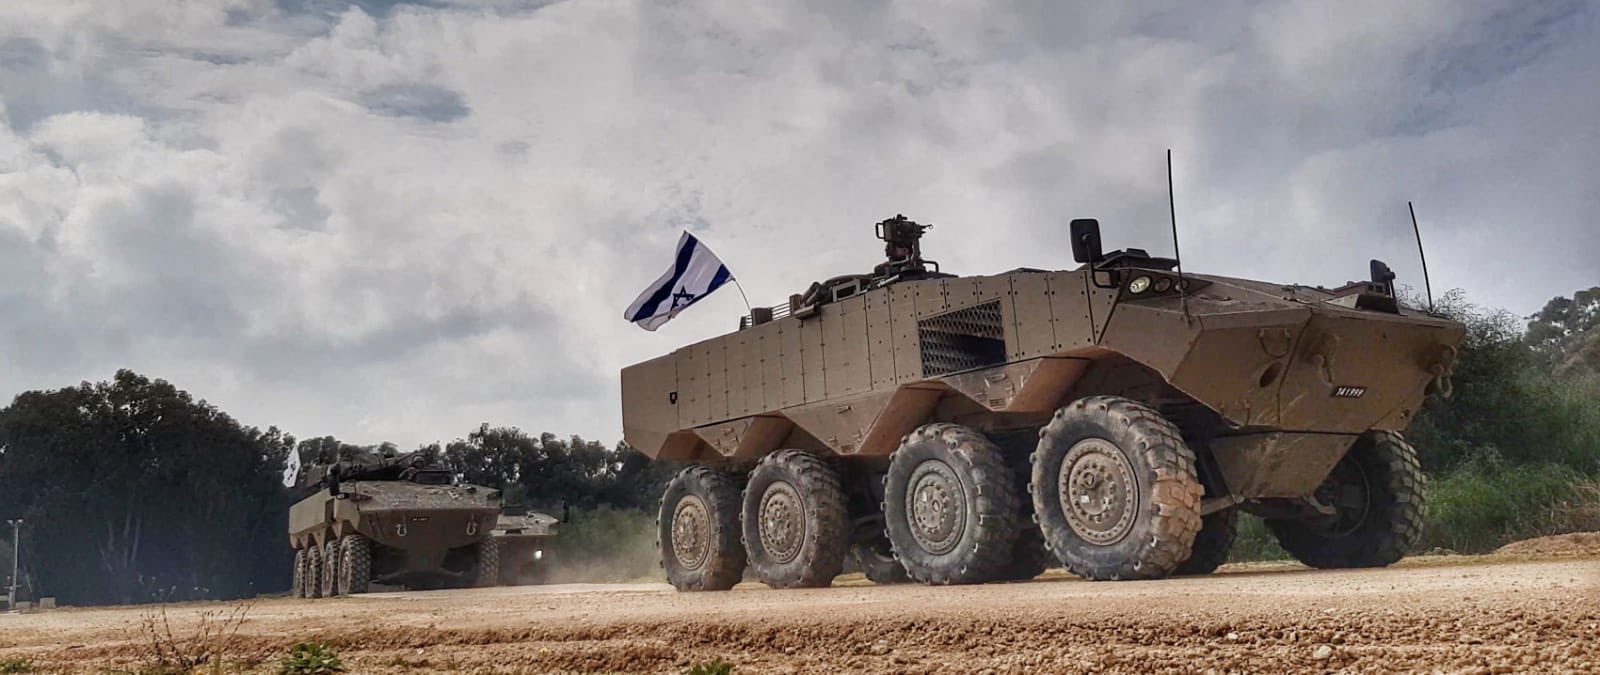 Israel Defense Forces Eitan 8X8 armoured personnel carrier (APC)